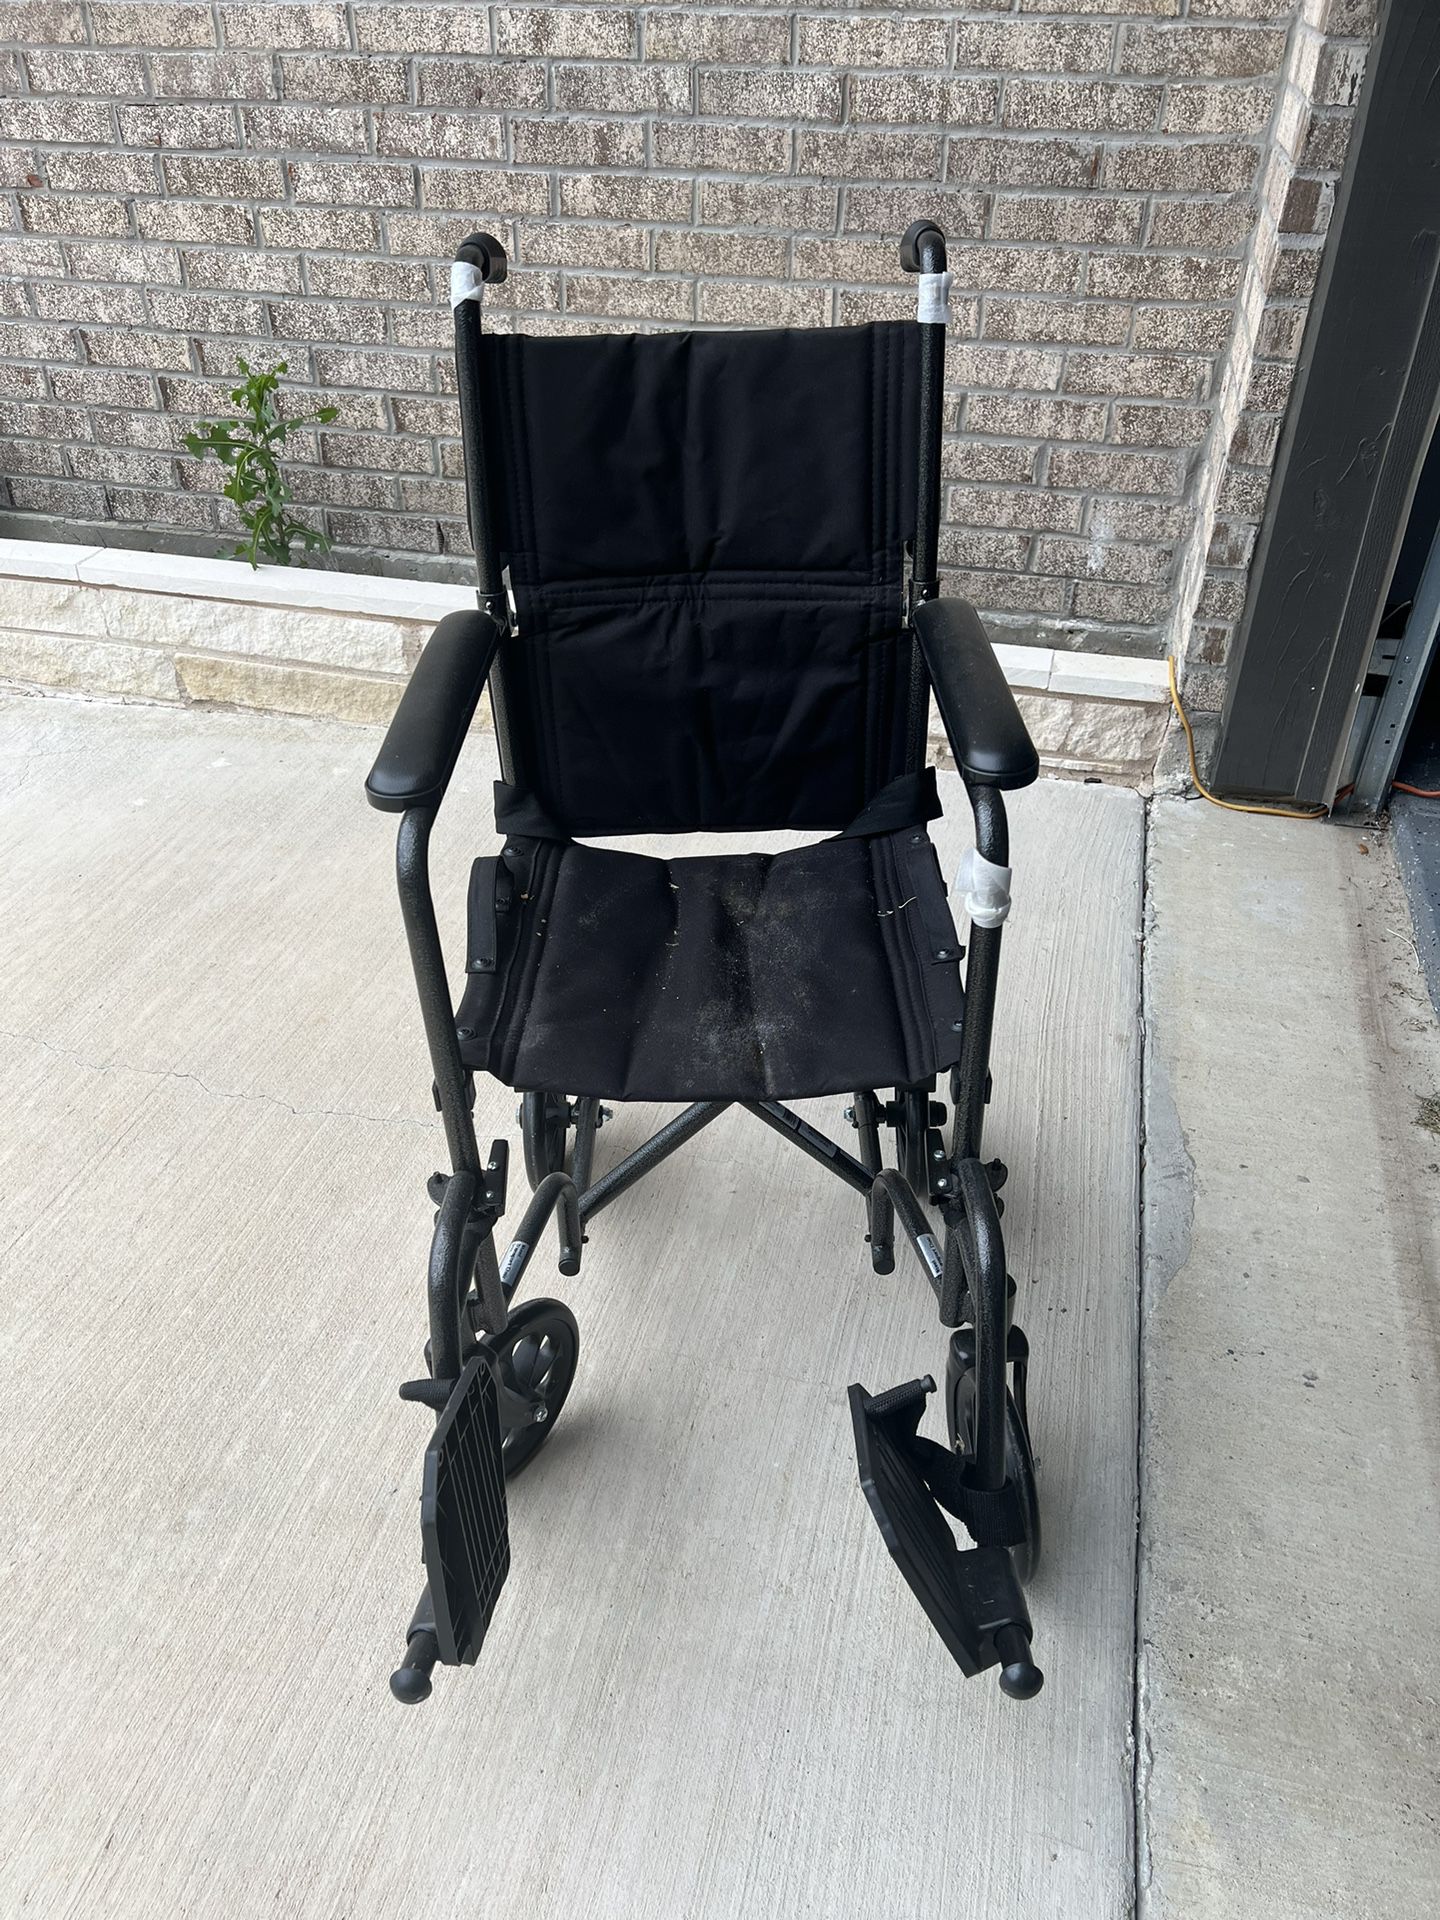 Wheel Chair For Sale - Wheelchair Black Color